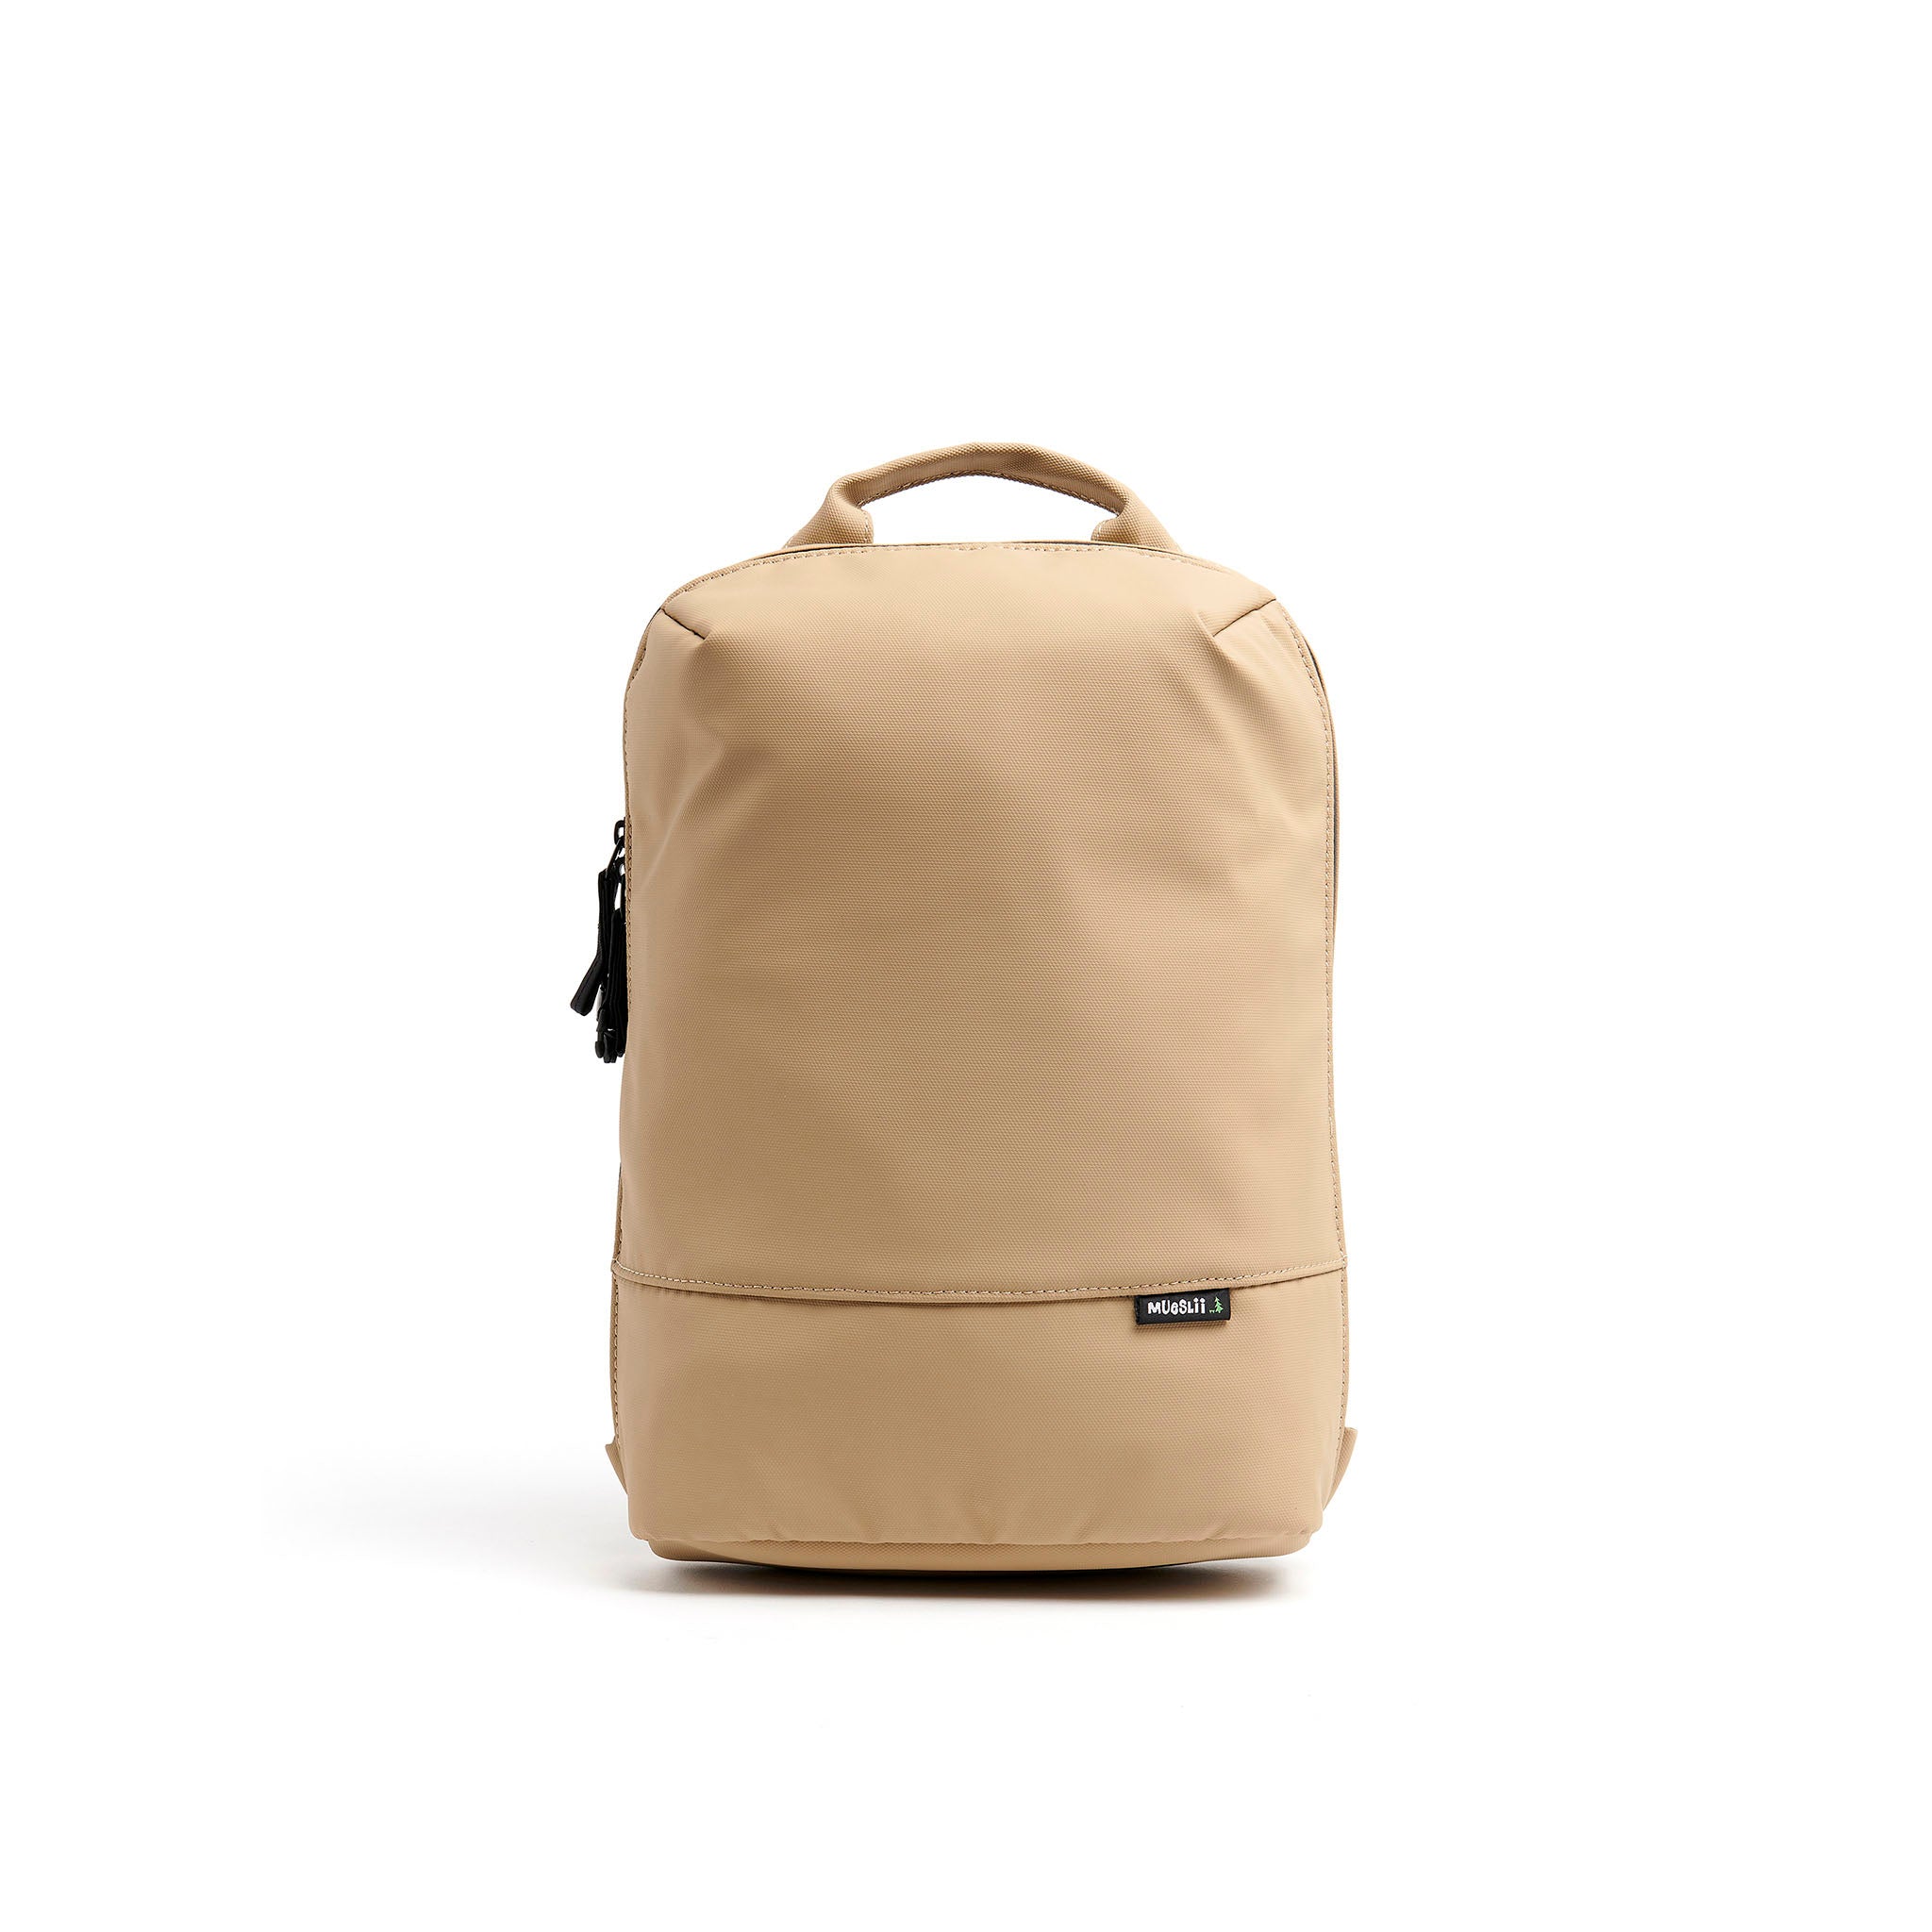 Mueslii small backpack, made of PU coated waterproof nylon, with a laptop compartment, color sand, front view.